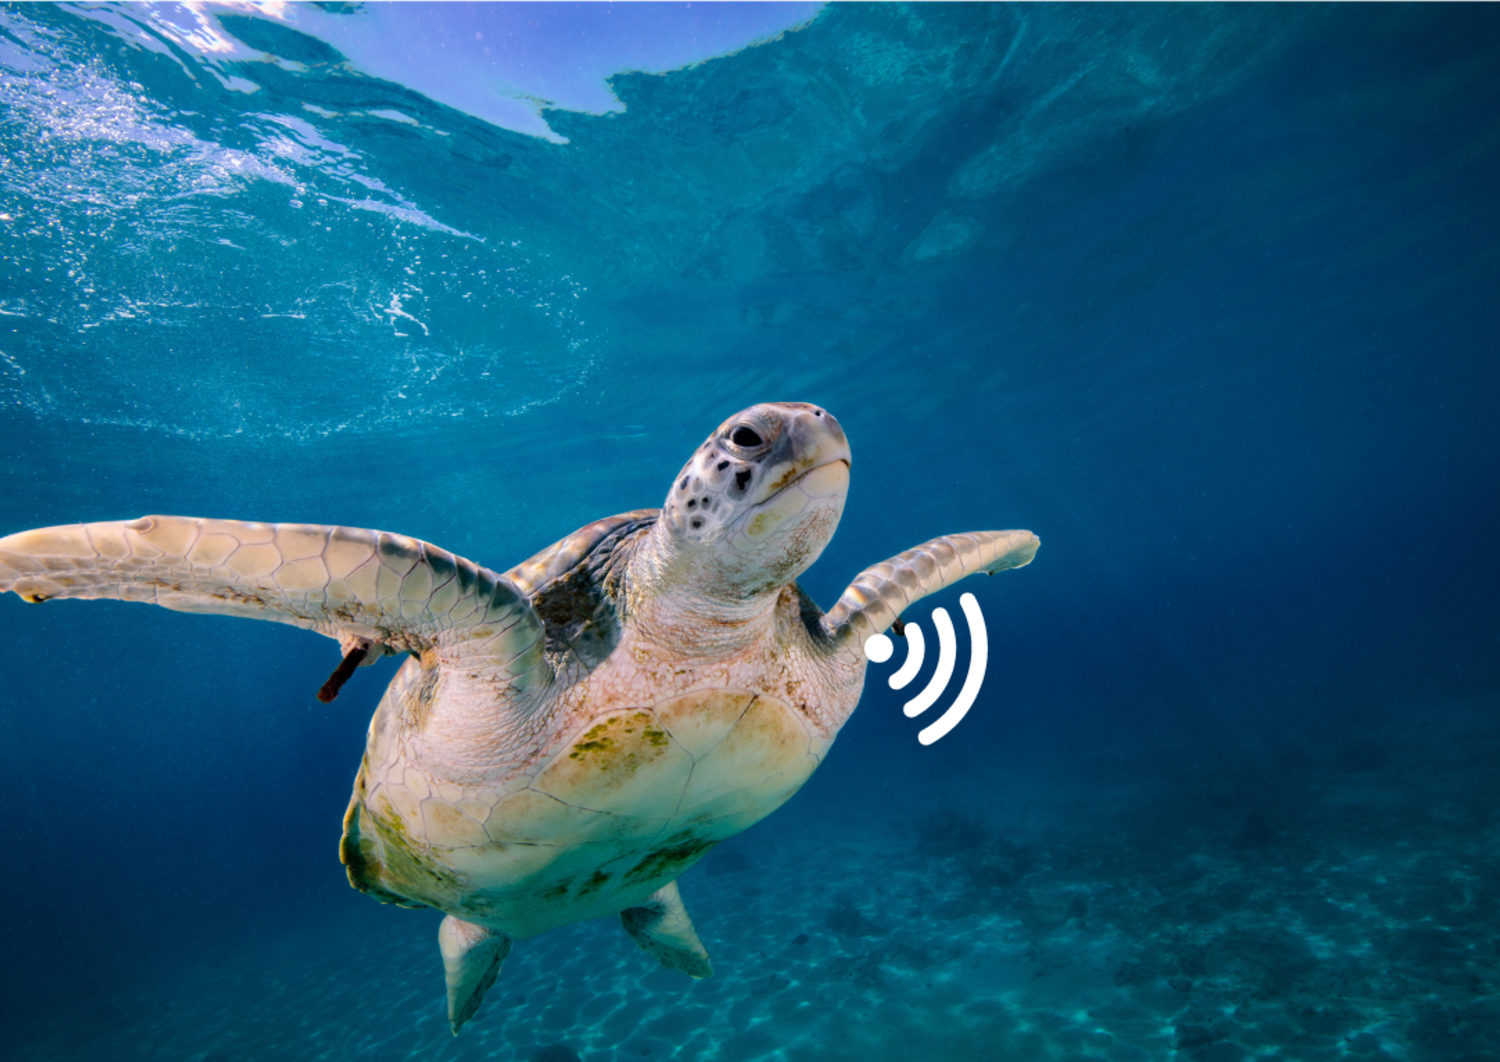 Sea turtle with signal, which sends, for example, the animal’s condition or other information.